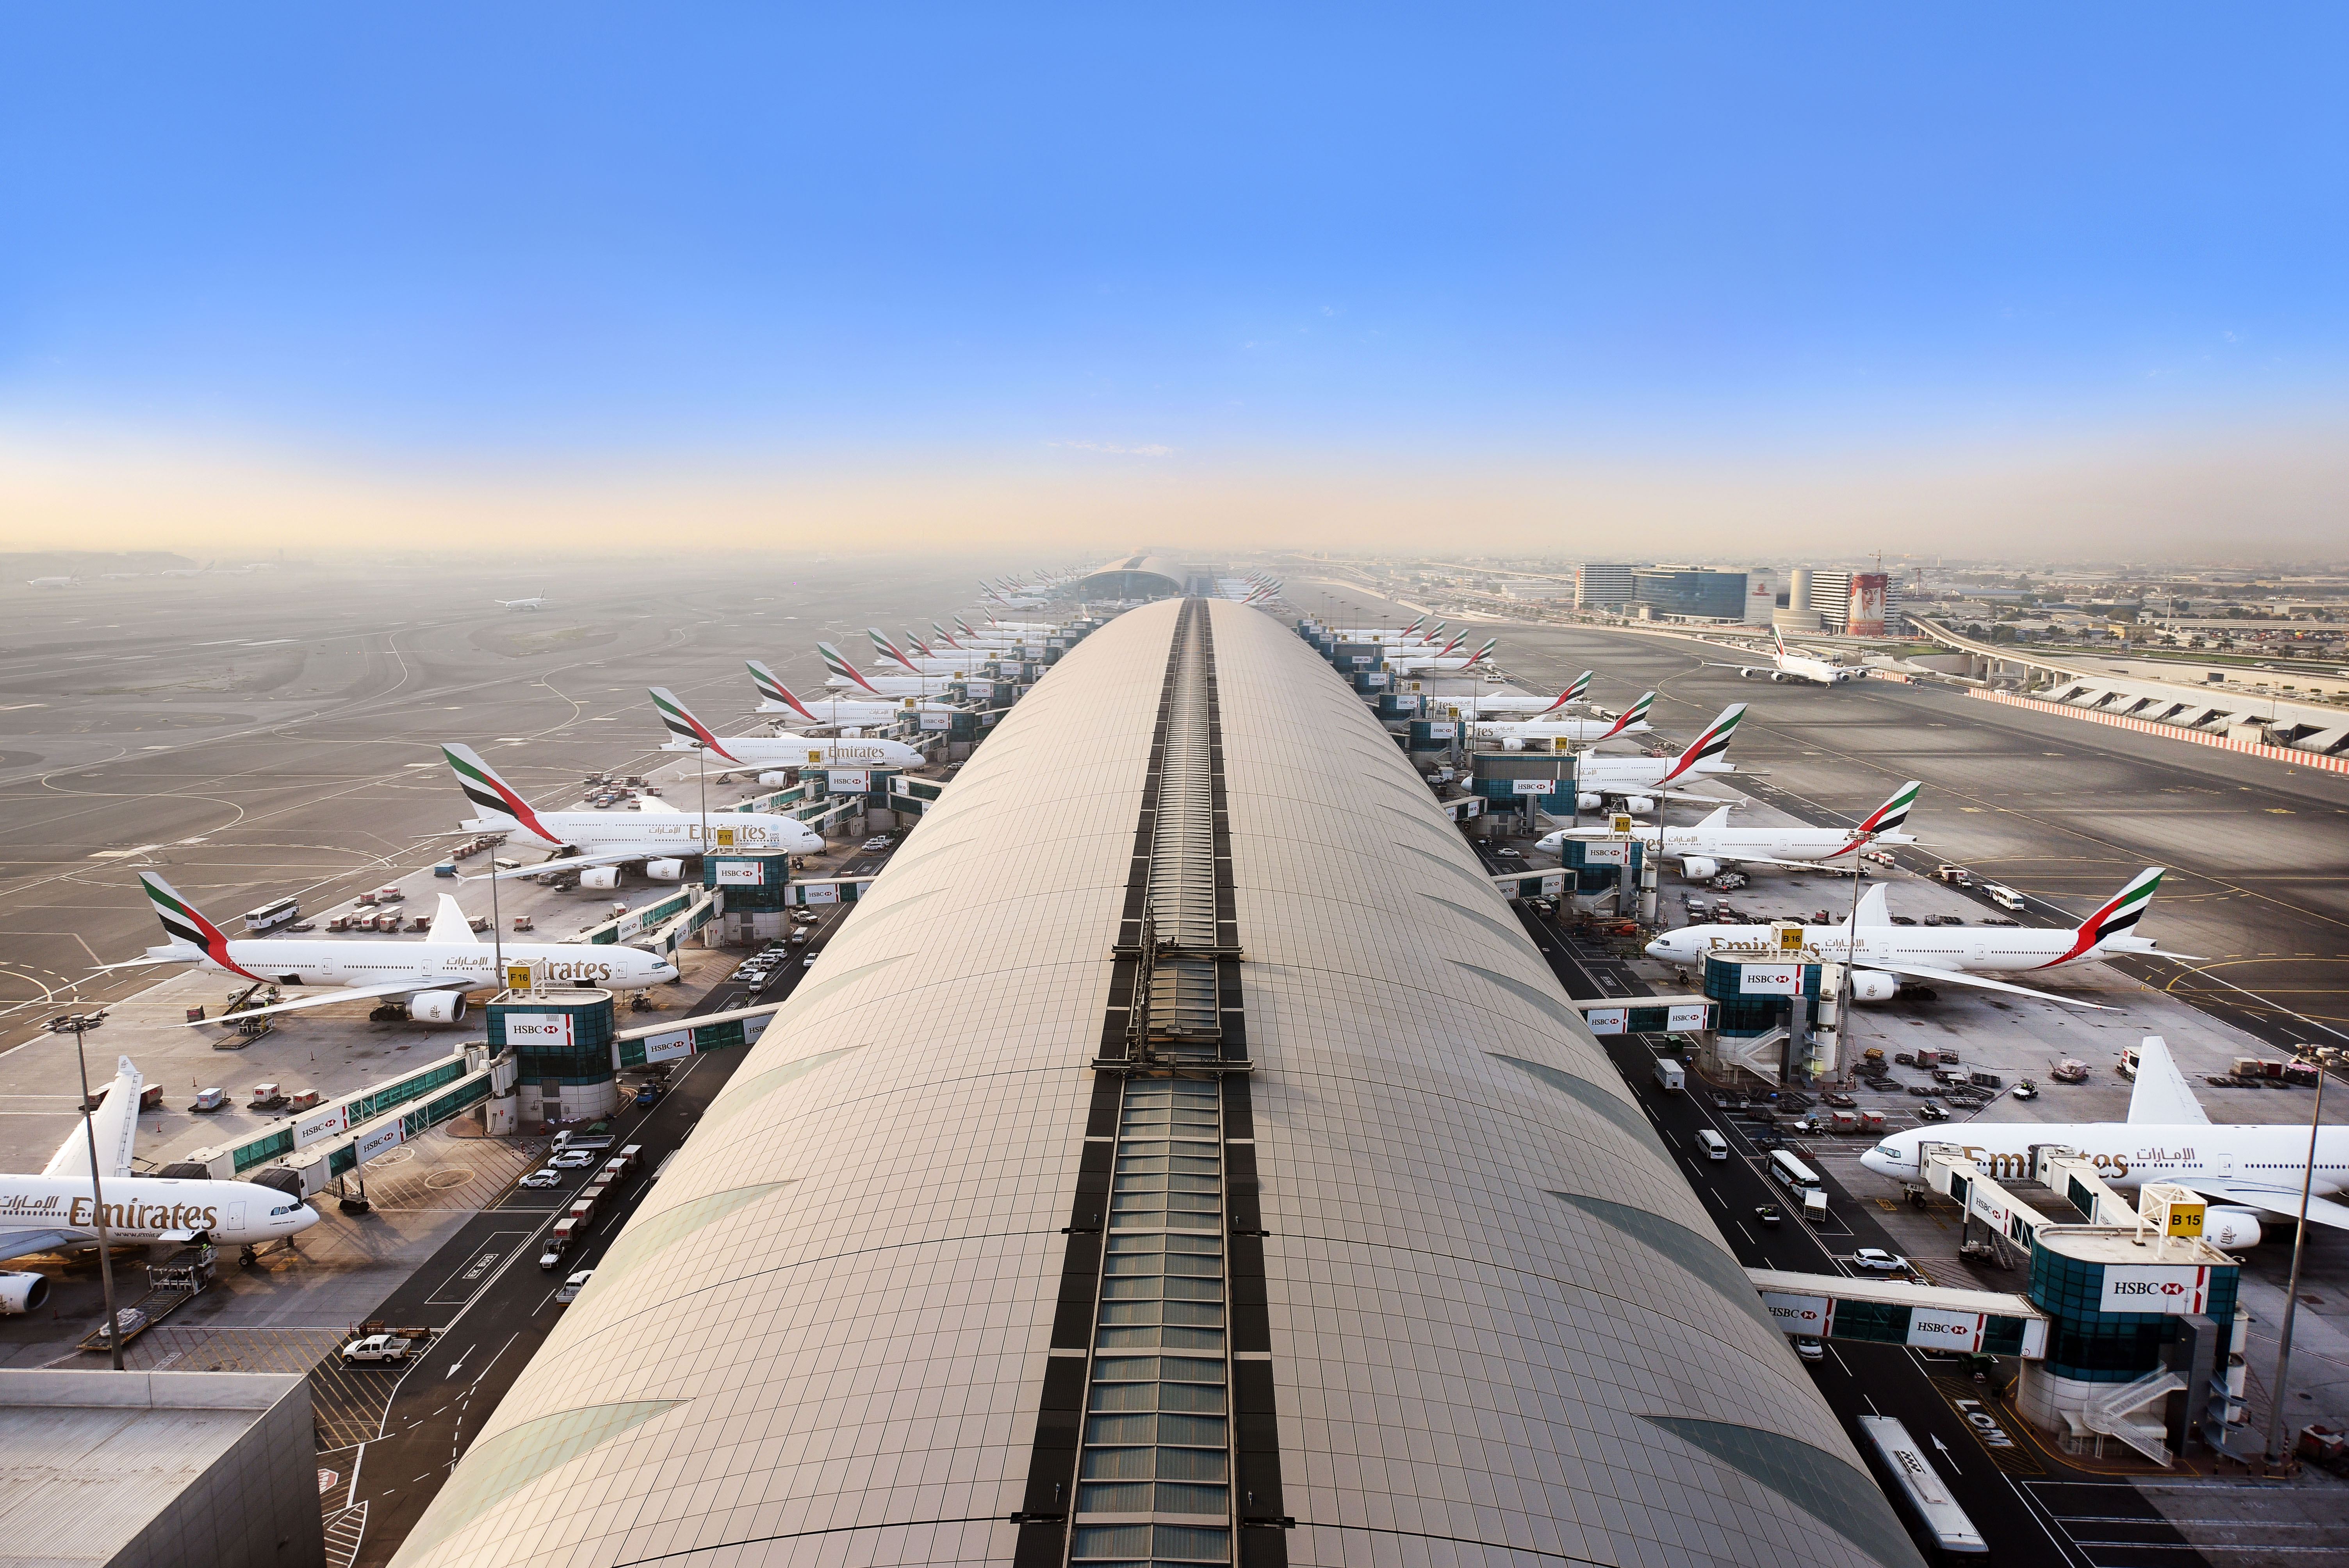 Emirates aircraft cover 432 million kilometres across the globe in six months